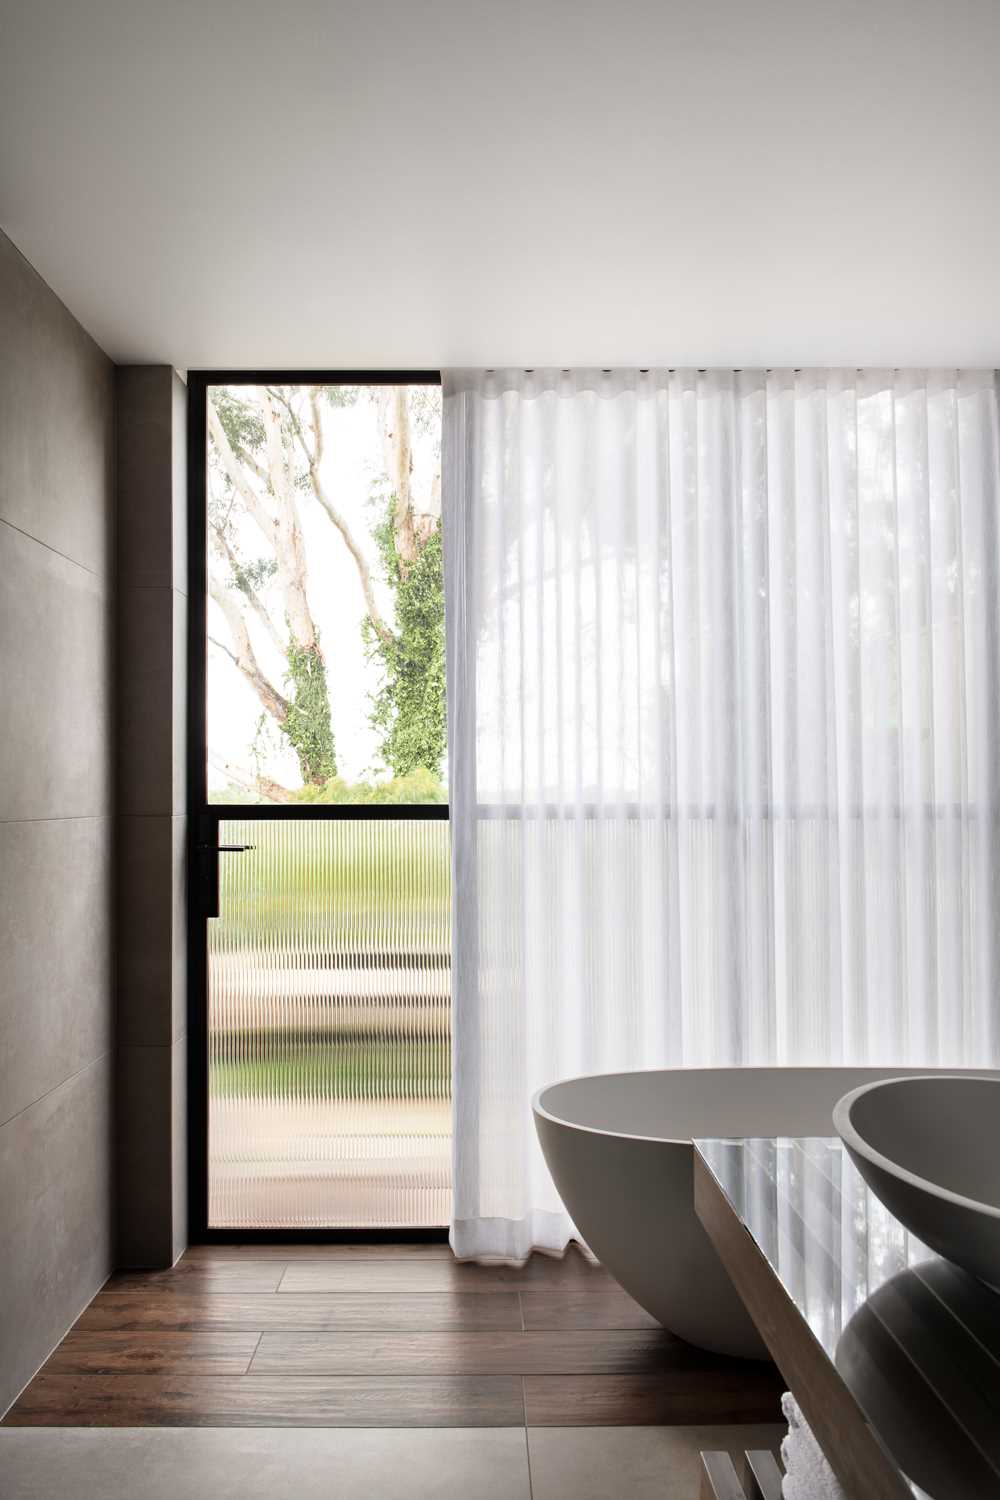 The black-framed steel glass doors connect to the completely private garden, while the soft curtain creates a softness for the bathroom.